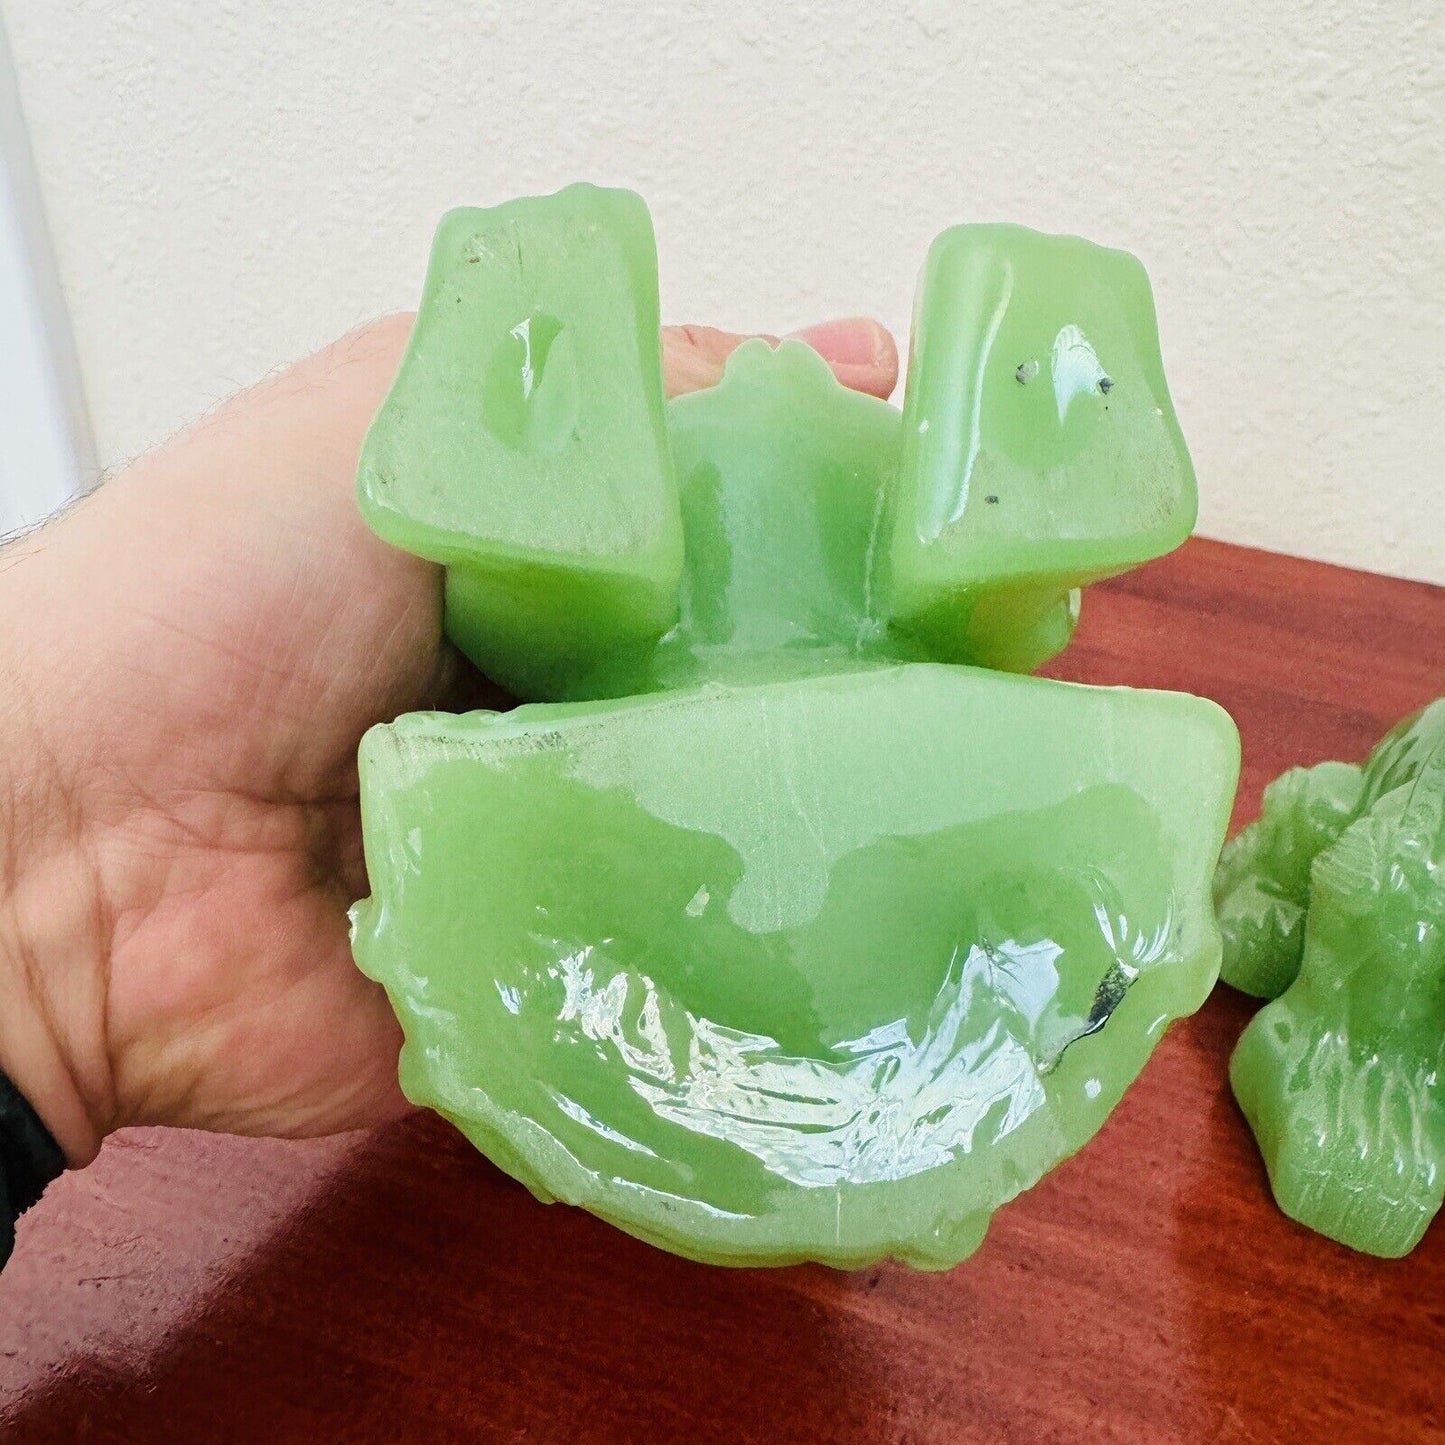 1940s Green Chinese Carved Jadeite Foo Dogs Sculpture Figurines Asian 2 Pieces